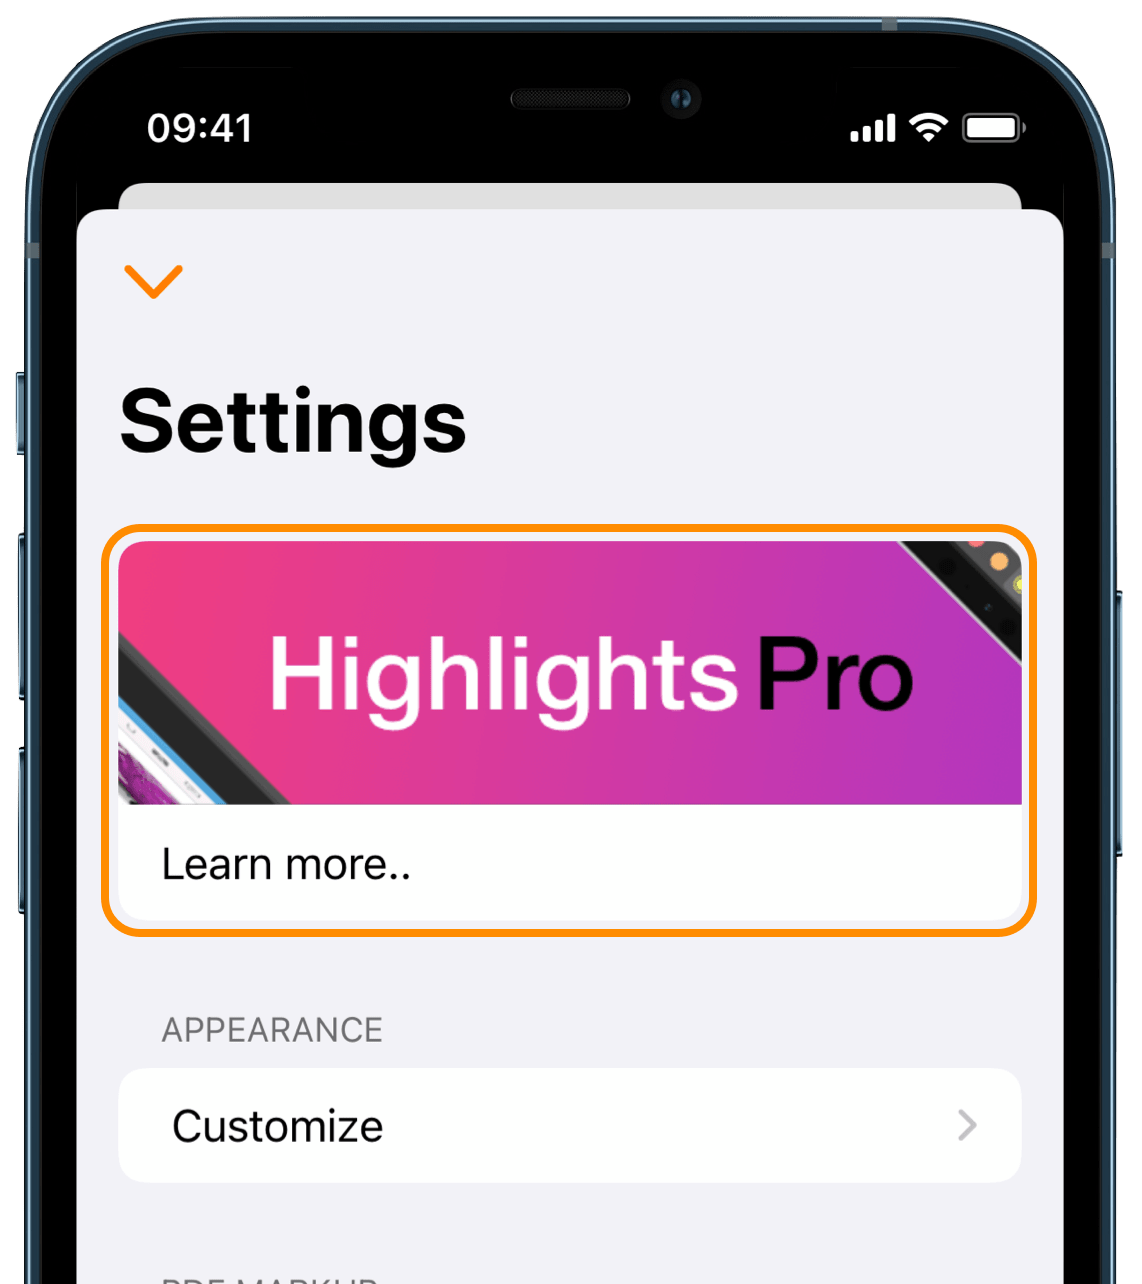 Highlights Pro banner in settings screen